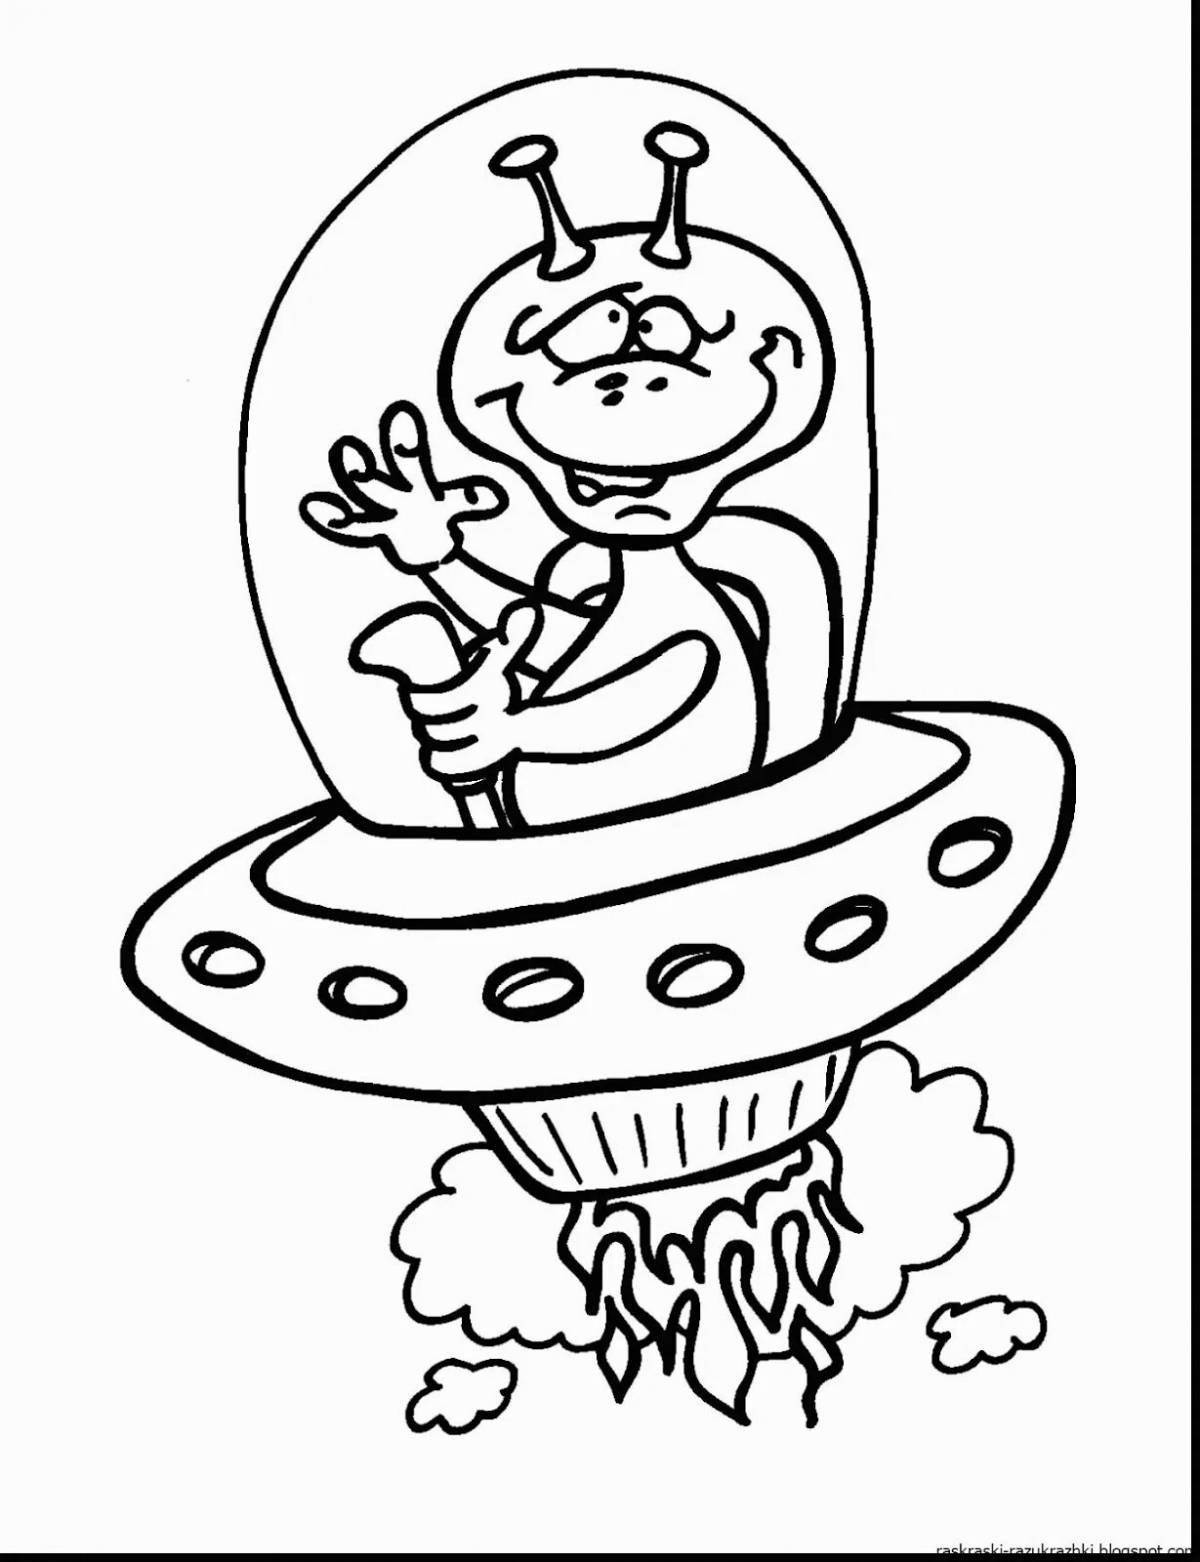 Color-party aliens coloring page for kids